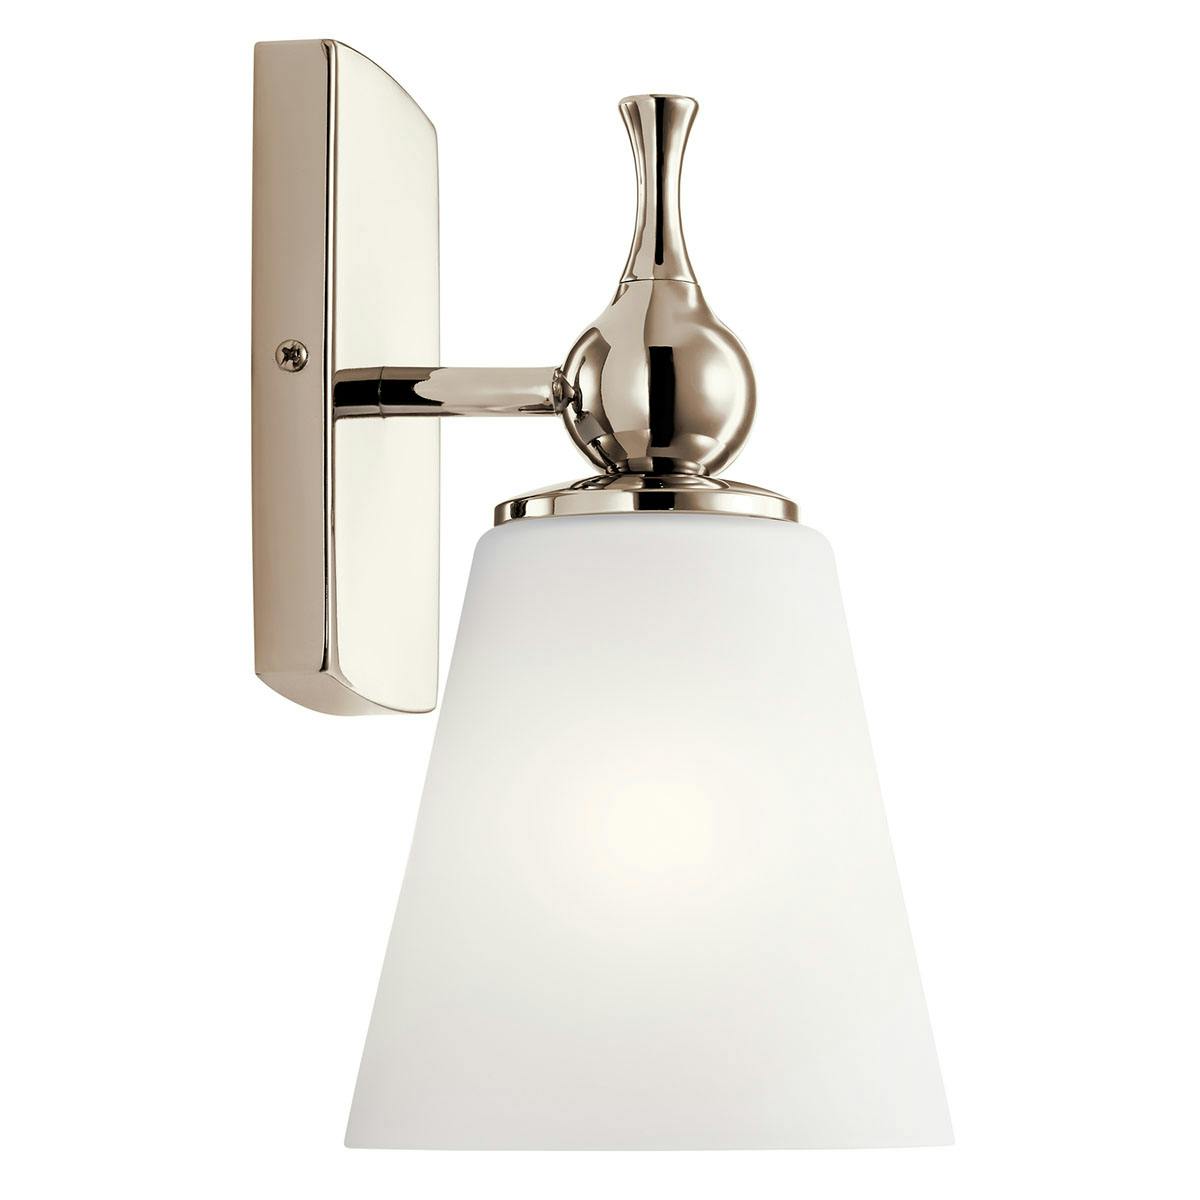 Profile view of the Cosabella 1 Light Sconce Polished Nickel on a white background